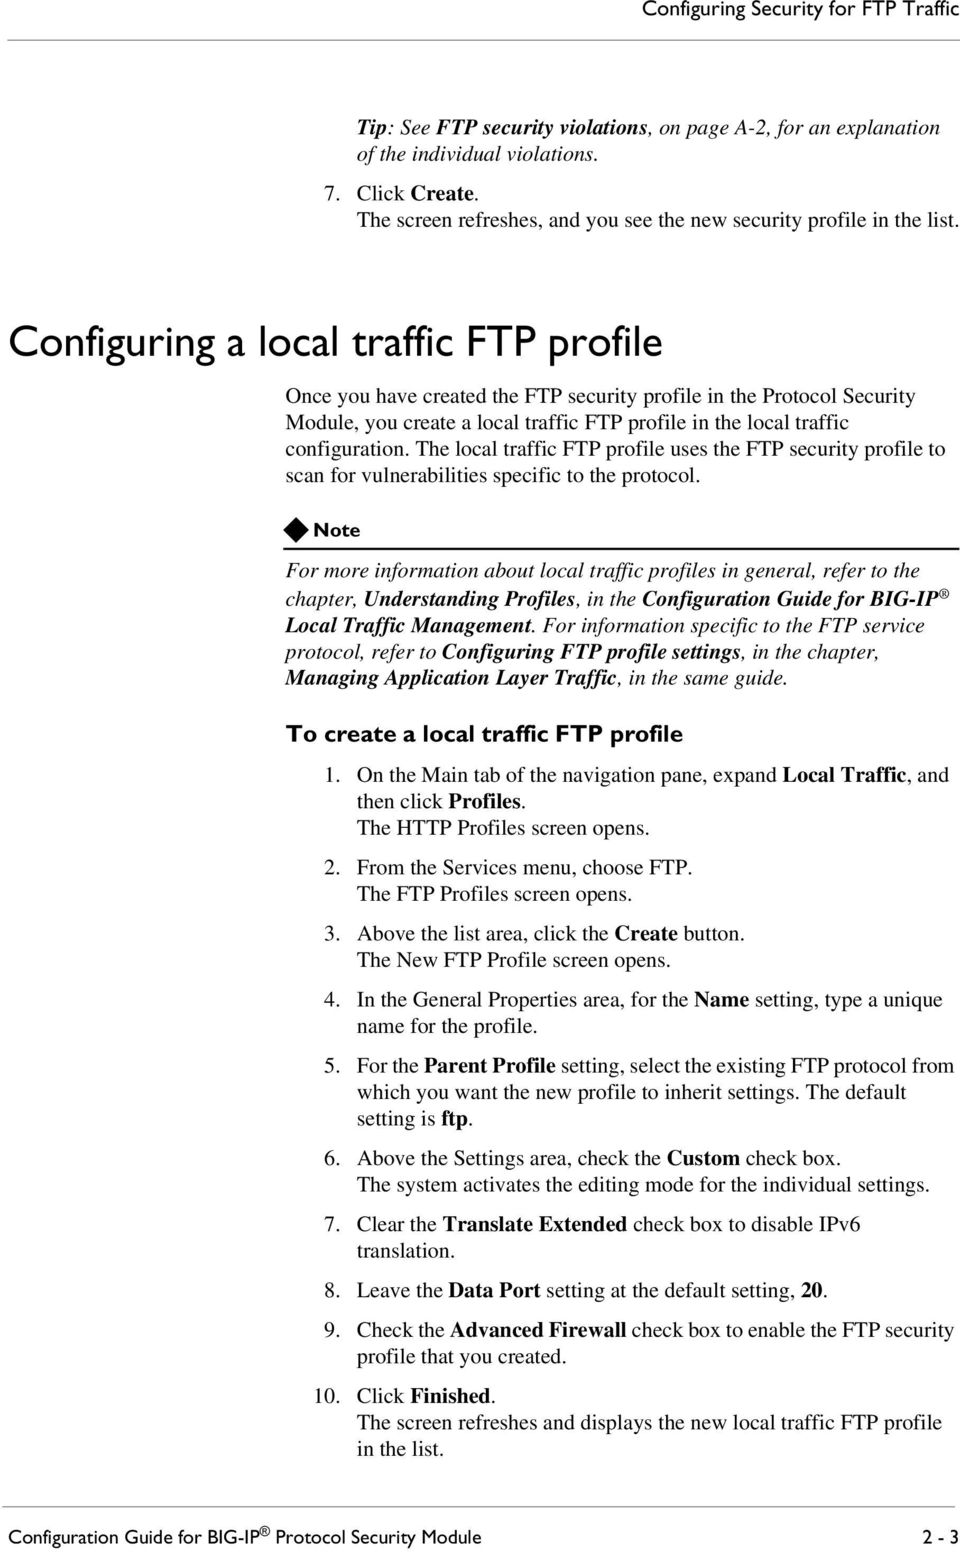 Configuring a local traffic FTP profile Once you have created the FTP security profile in the Protocol Security Module, you create a local traffic FTP profile in the local traffic configuration.